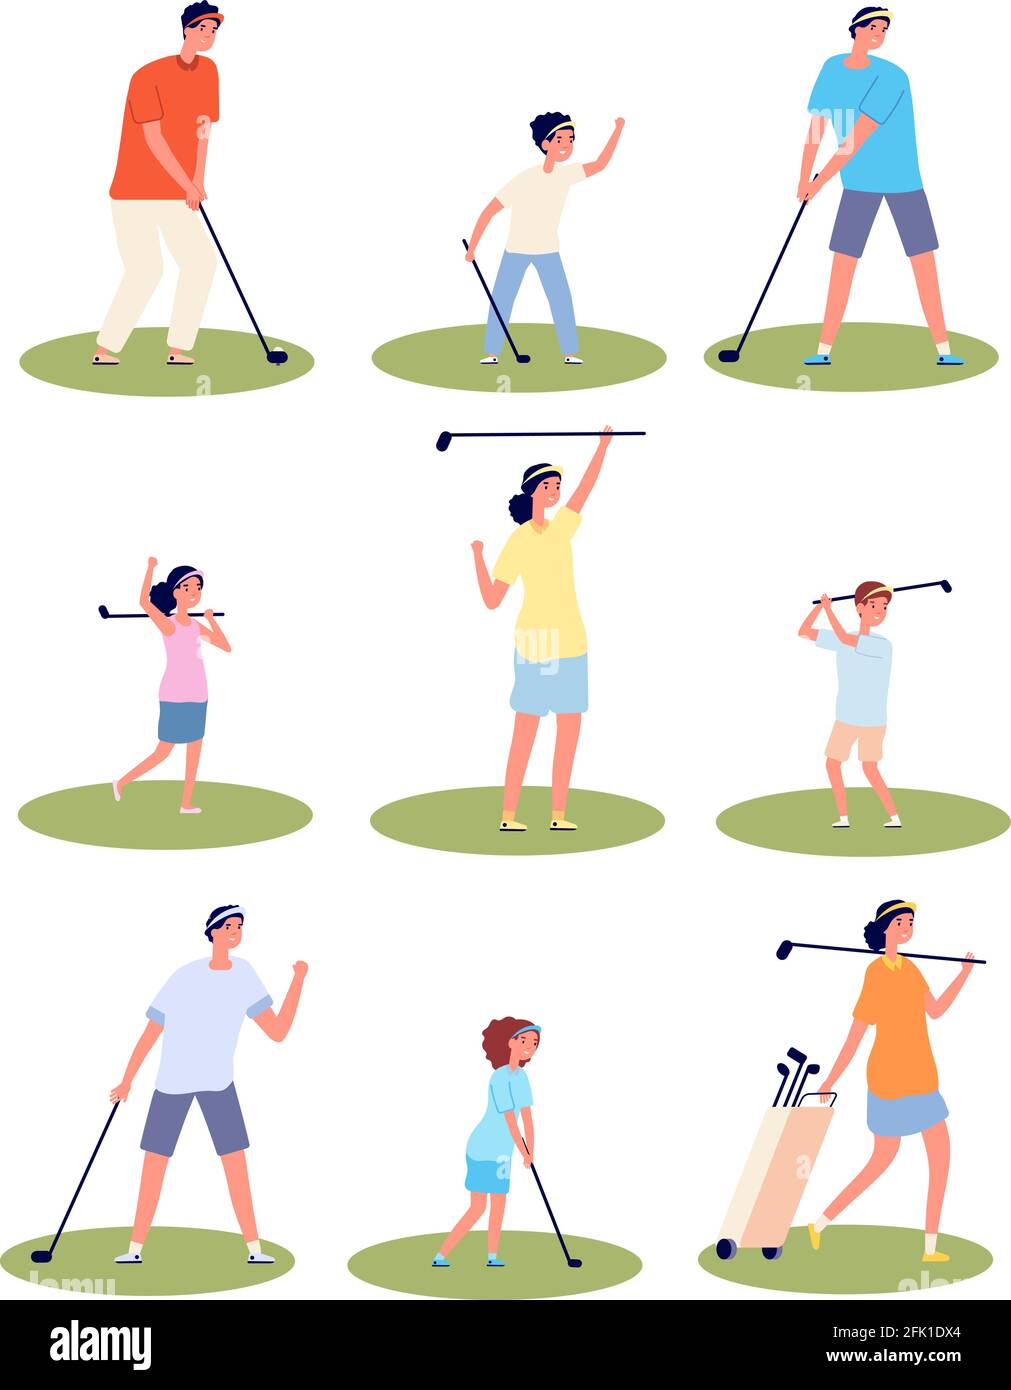 Golf players characters. Men women playing, isolated golfers with equipment and bags. Flat male female outdoor recreation sport vector set Stock Vector